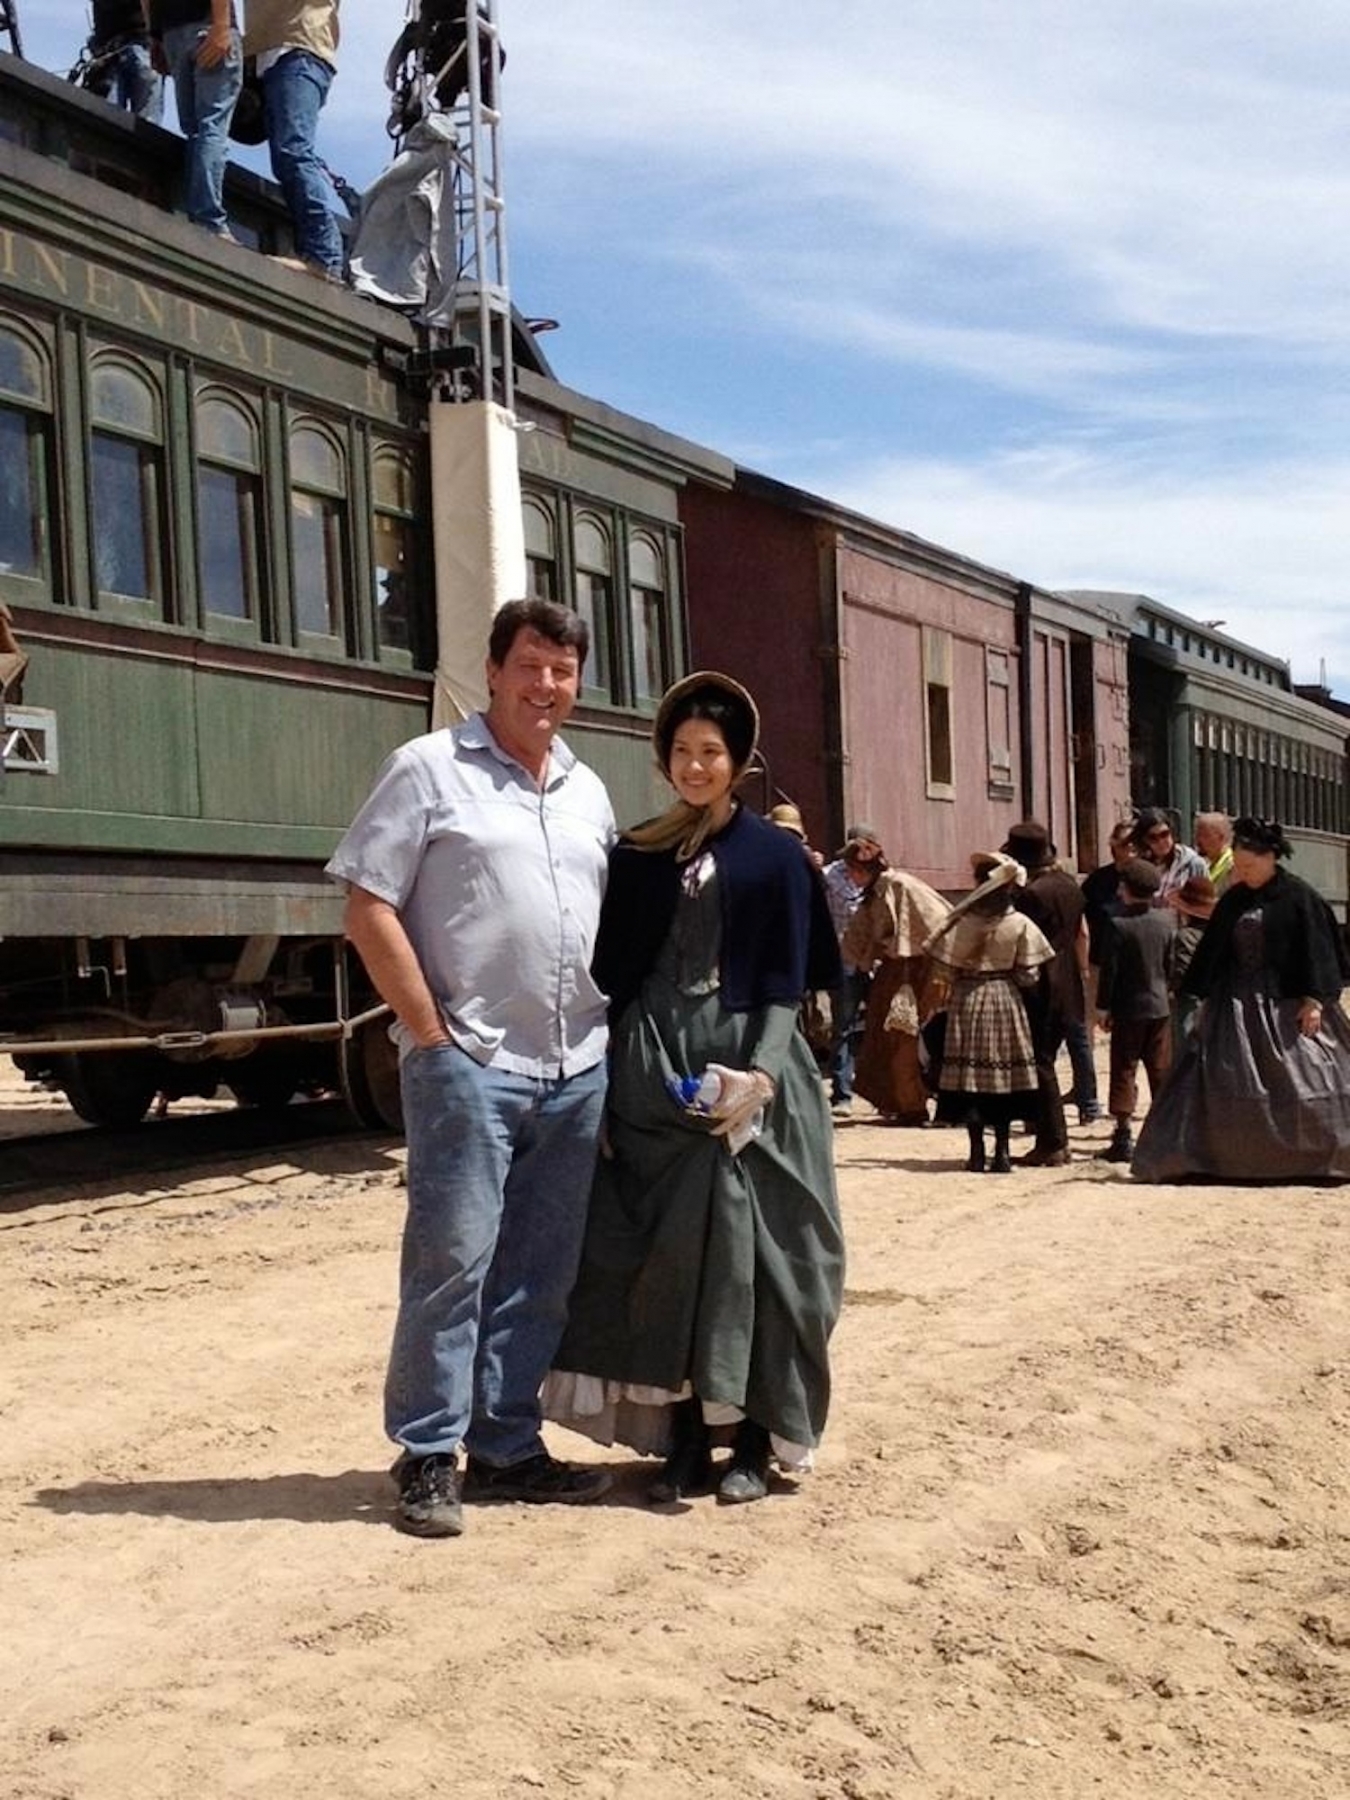 Craig Hosking stands next to his stepdaughter, Michelle, on the set of "The Lone Ranger." Michelle, 17, was an extra in the film, which premieres next week. (submitted photo)